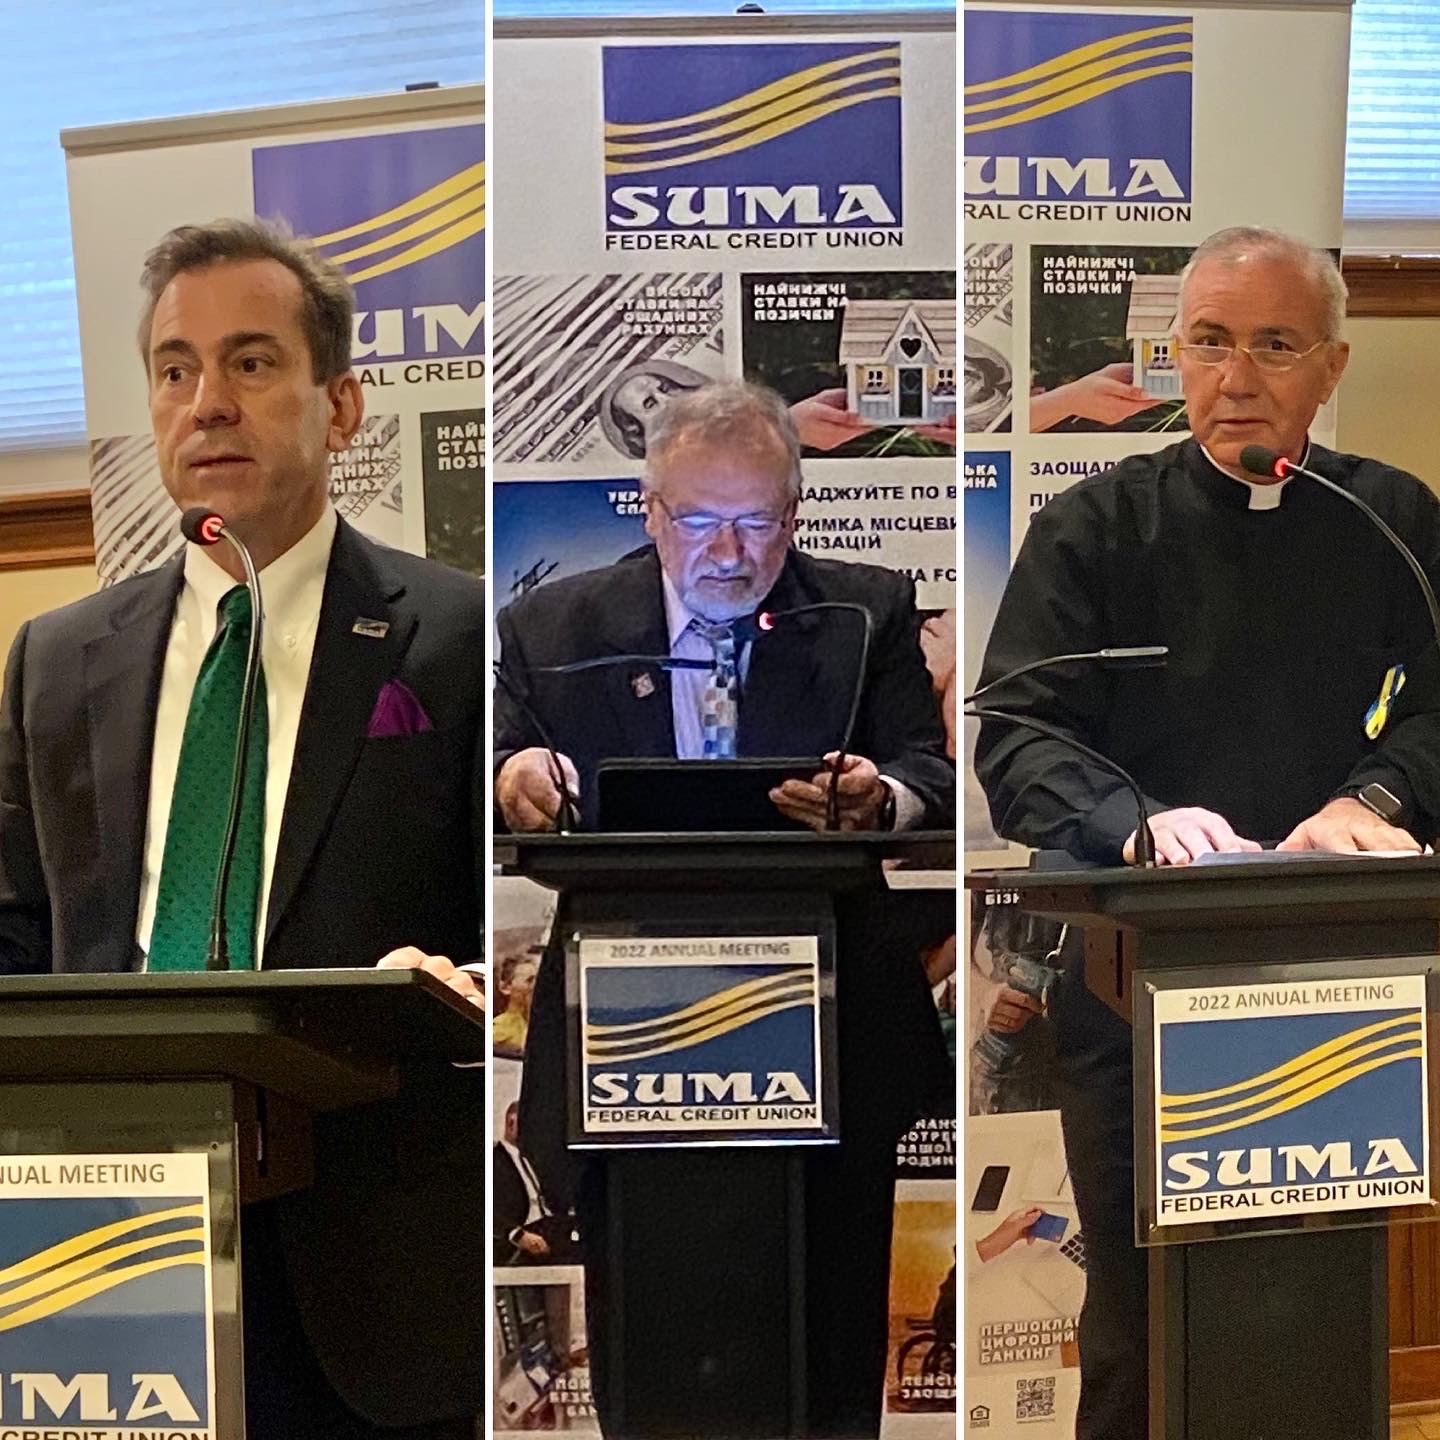 Photos of SUMA FCU Staff, Board and Priest at Annual Meeting